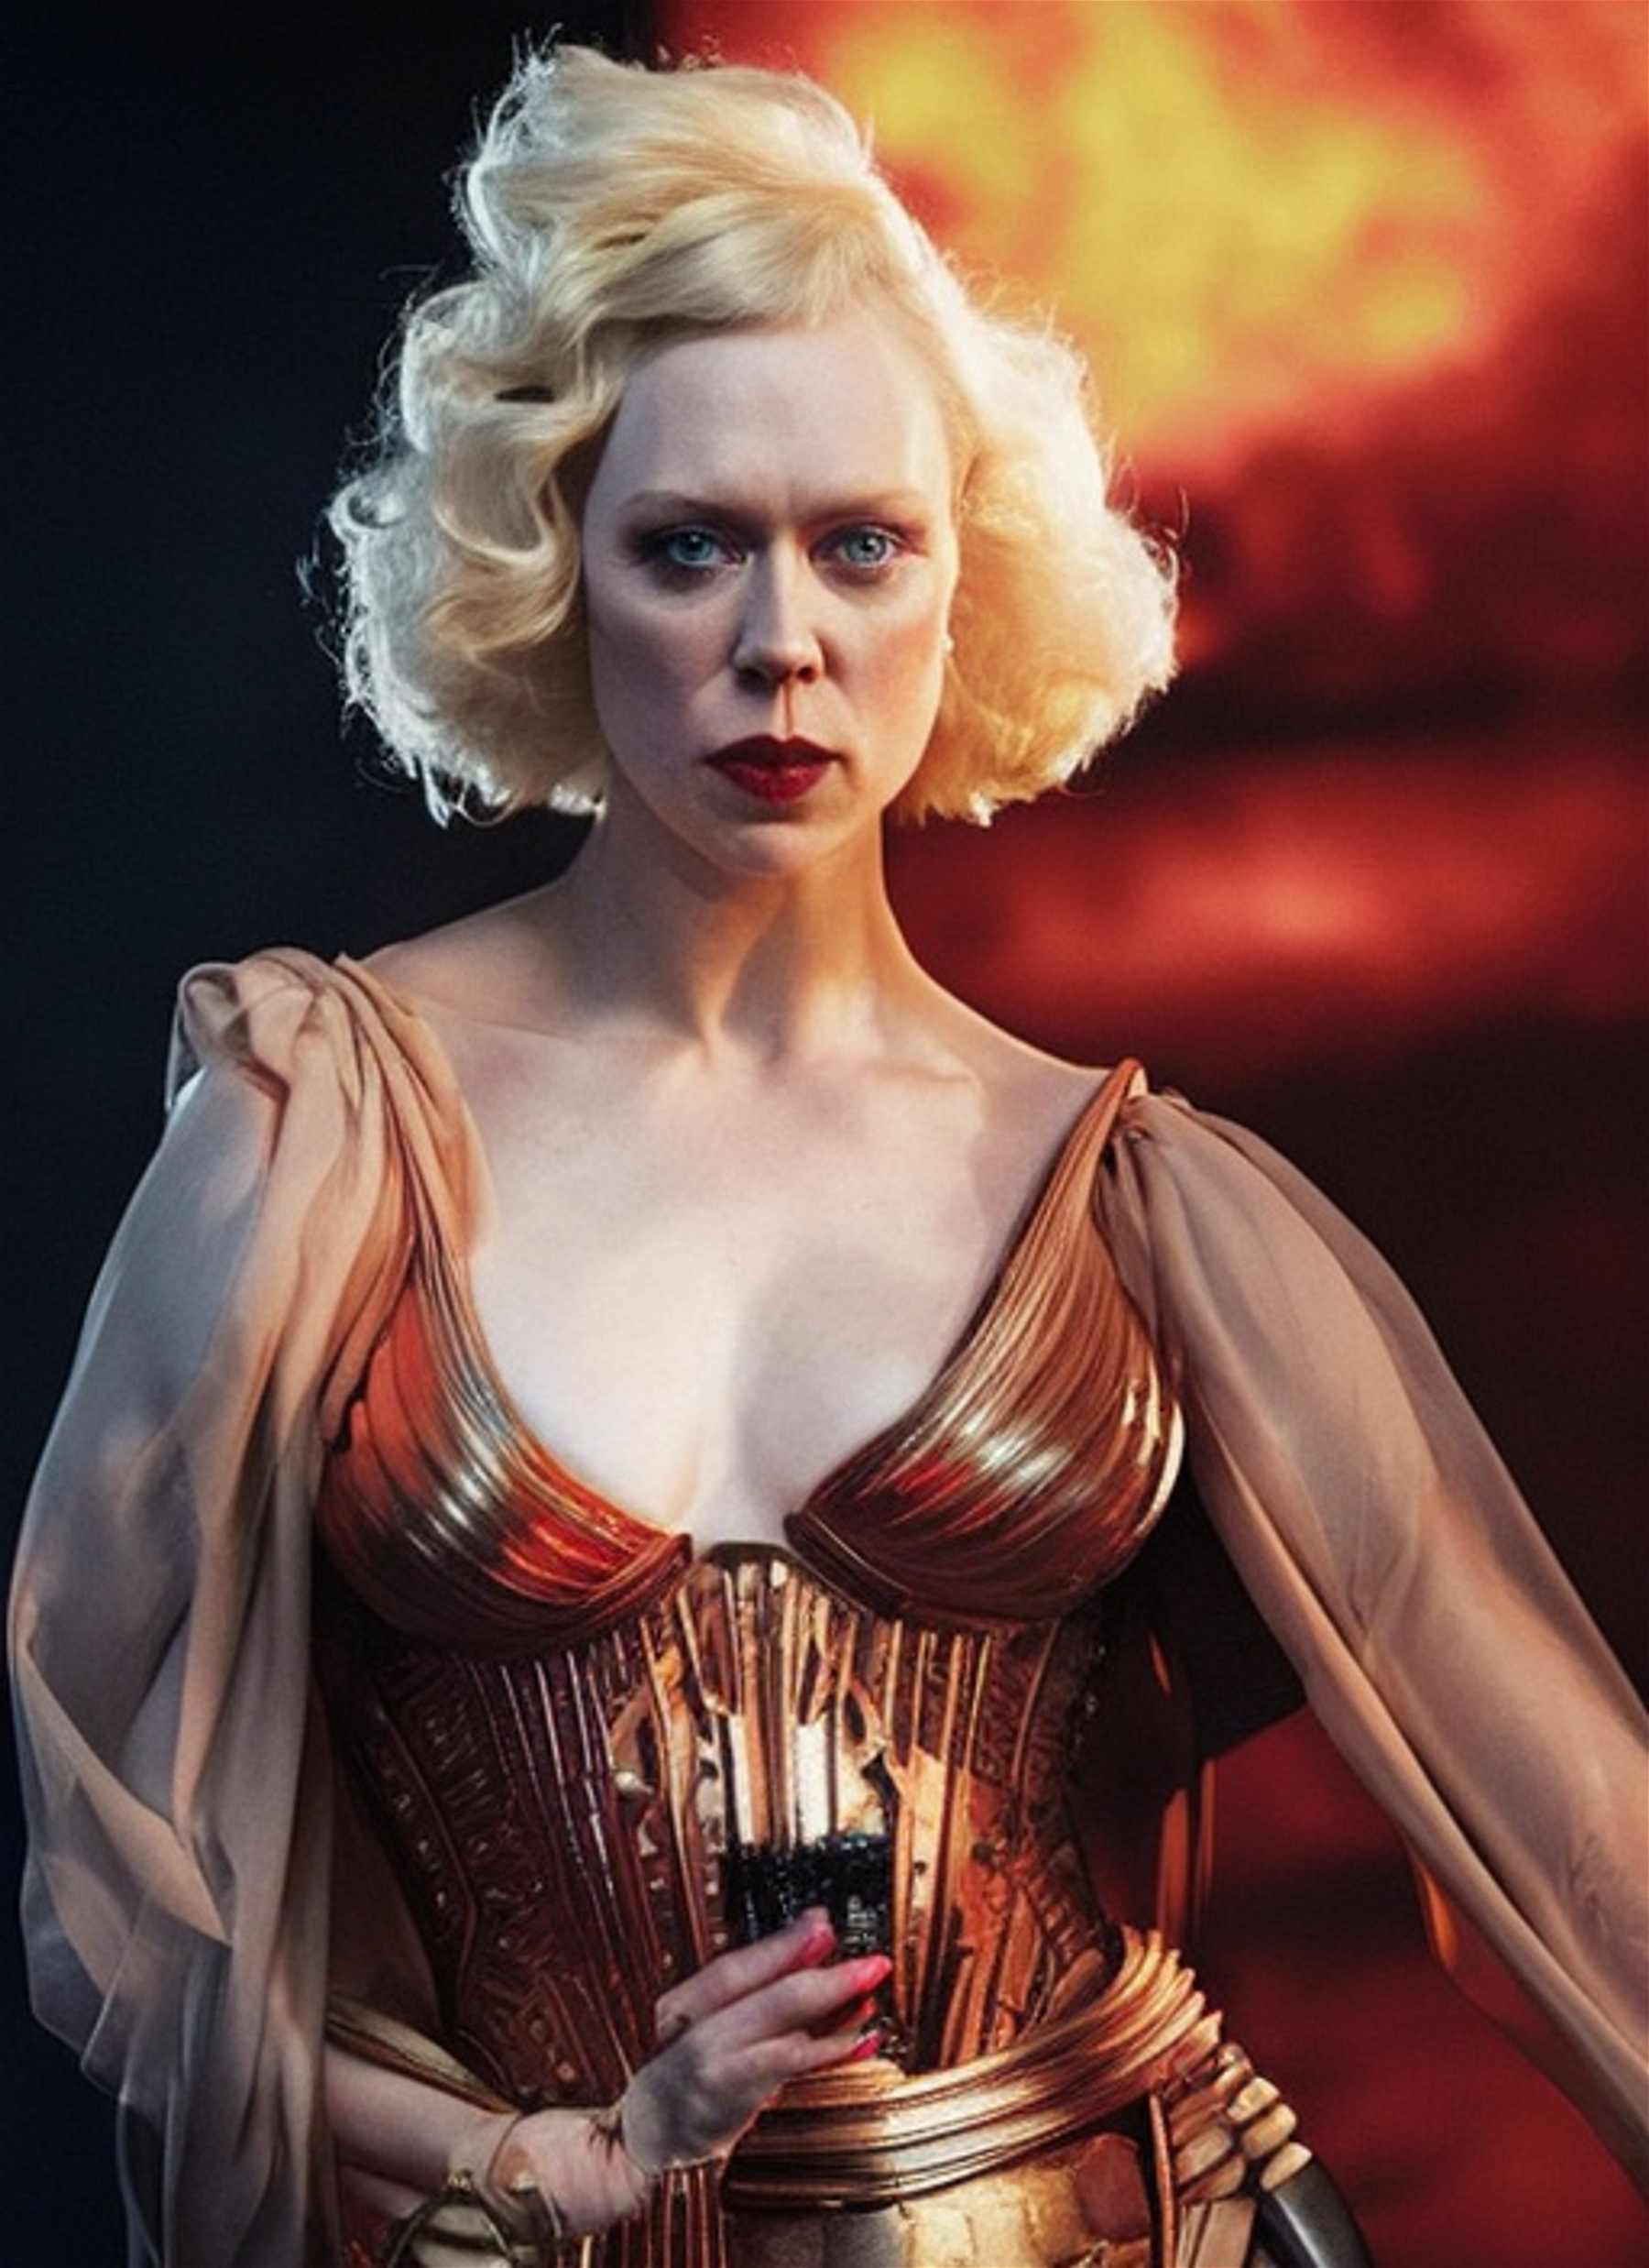 A bold and striking portrait of Gwendoline Christie, with a fierce and powerful expression, inspired by the works of Frank Frazetta and Simon Bisley, featuring strong contrasts and dramatic lighting.